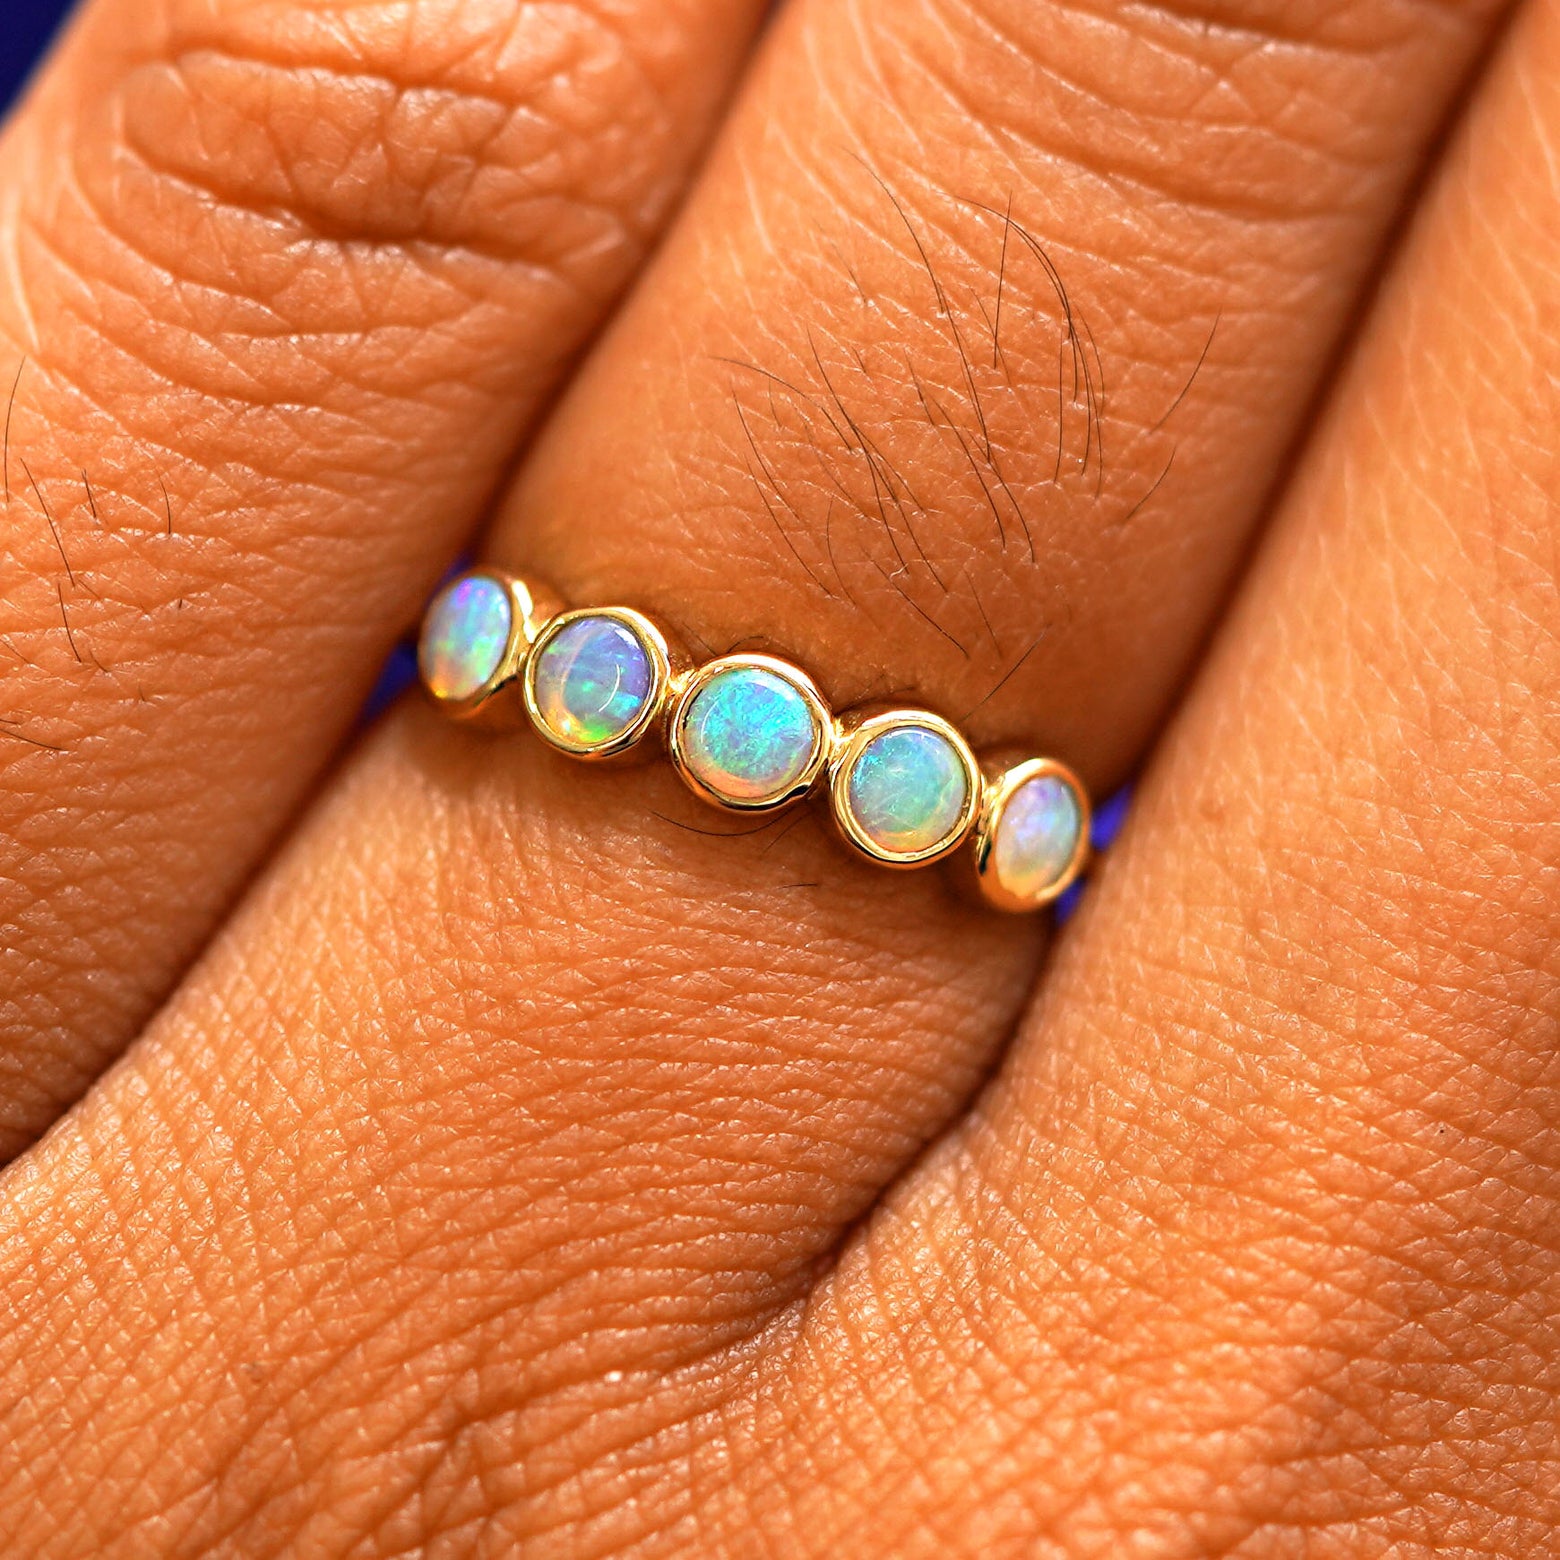 Close up view of a model's hand wearing a yellow gold 5 Gemstones Ring in opal